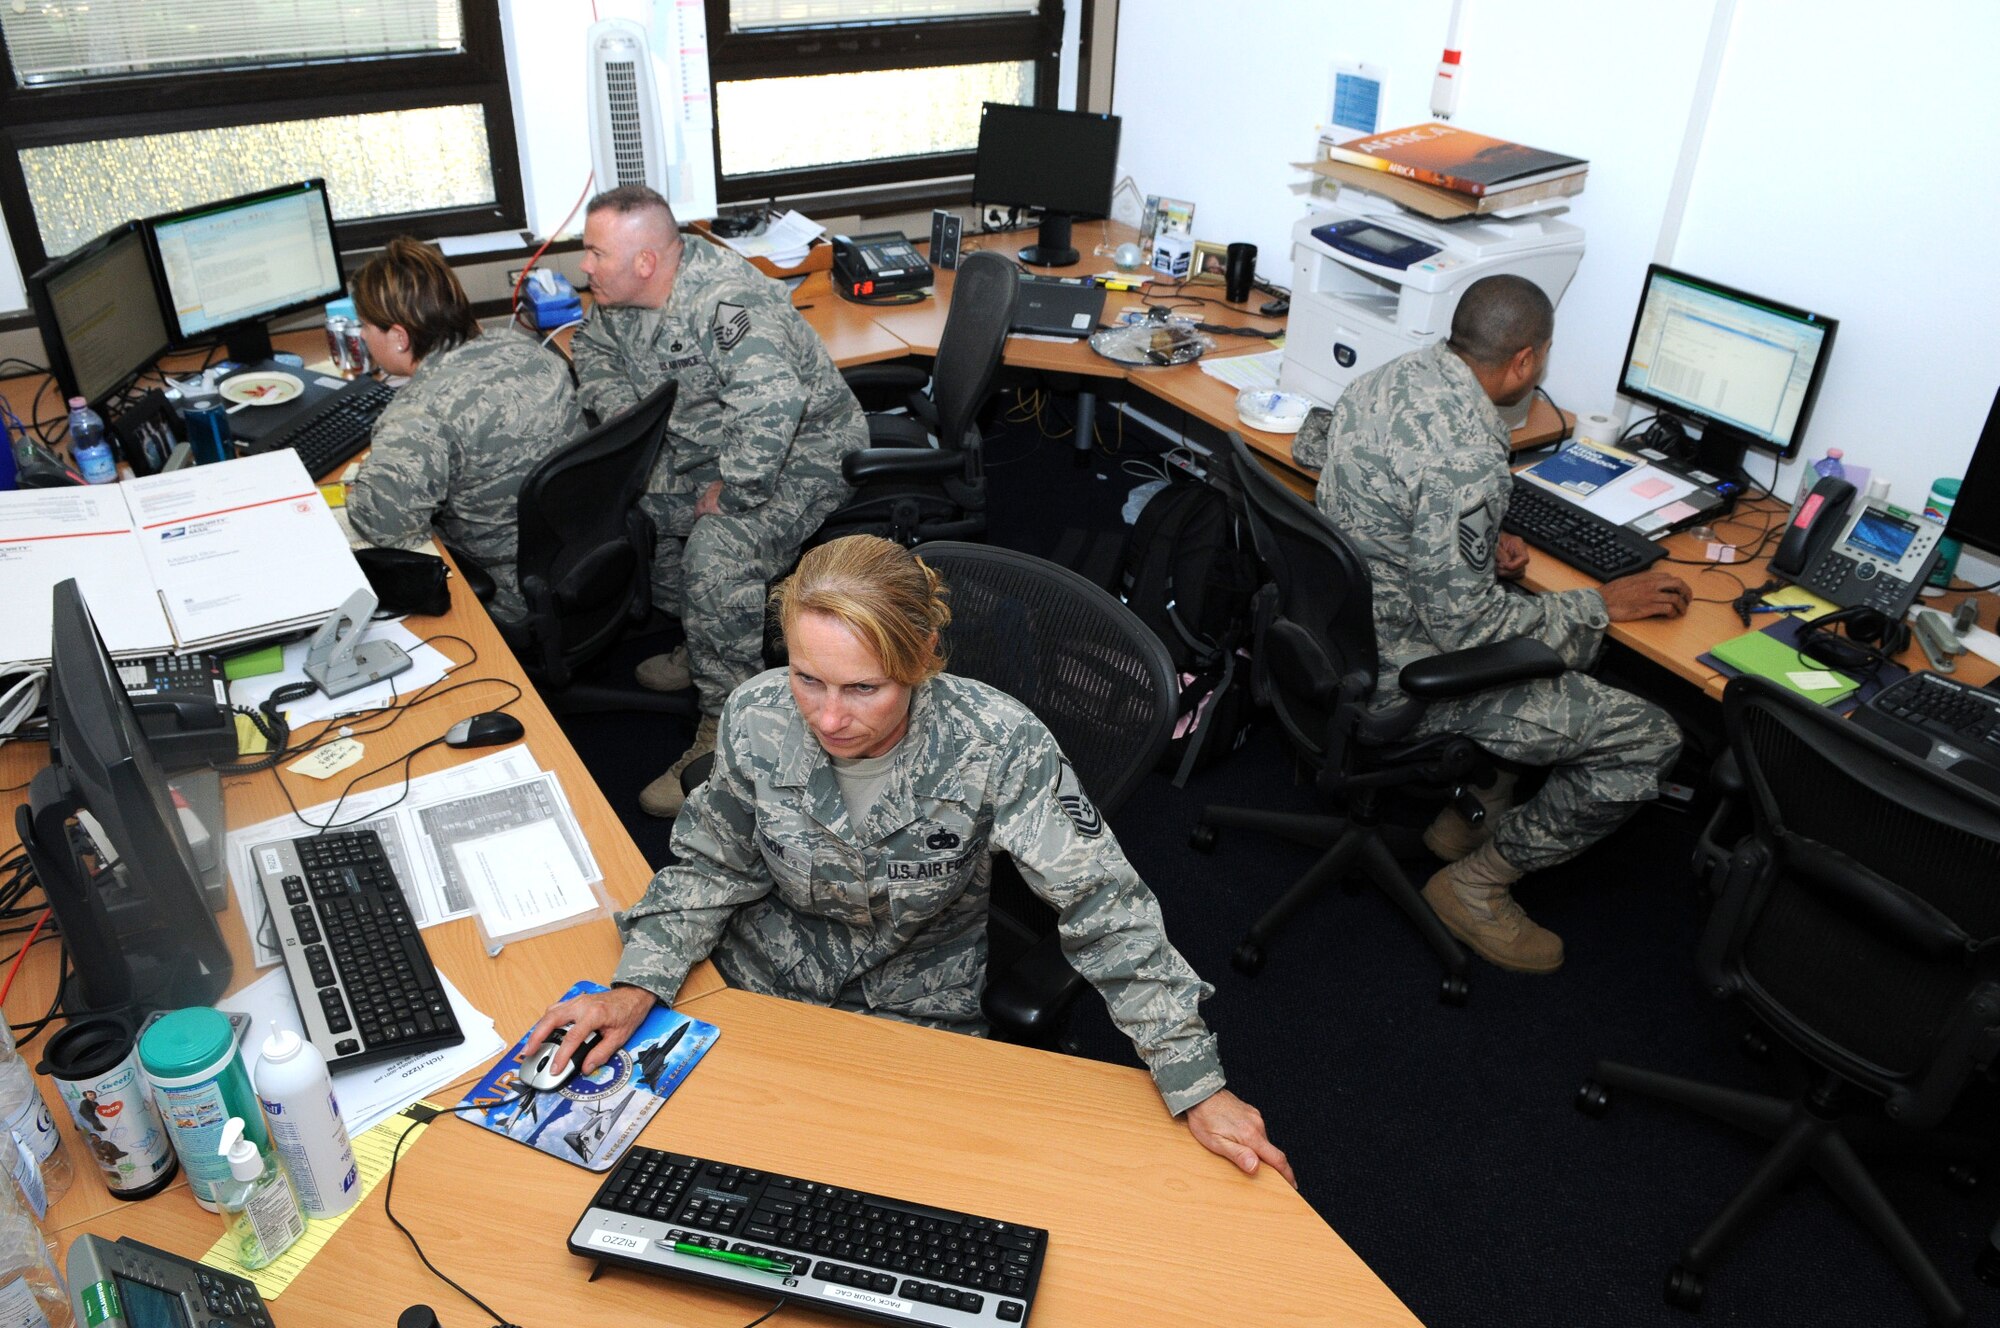 RAMSTEIN AIR BASE, Germany -- (Clockwise from right) Master Sgt. Shaun Ford, Master Sgt. Susan Cook, Capt. Amanda Sater and Master Sgt. Rich Rizzo of 17th Air Force's A4/7 (Logistics) Directorate share a small work space due to ongoing construction and the growing size of the staff. Ten workstations have been improvised in the 248-square foot room. (USAFE photo by Master Sgt. Jim Fisher)  